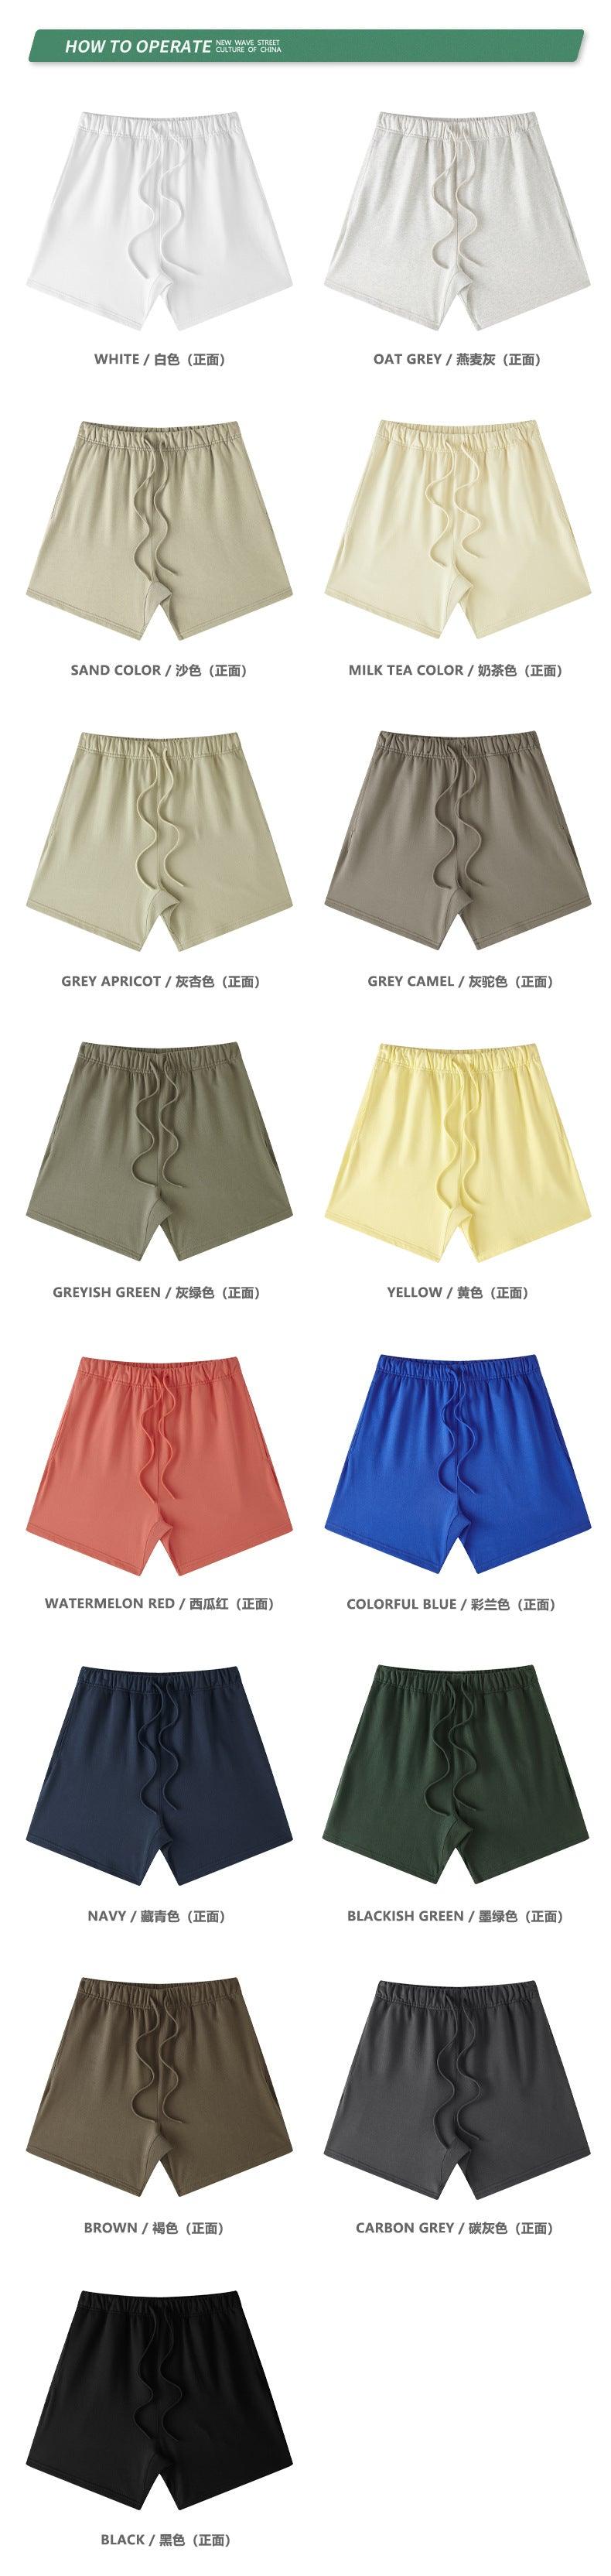 BE THRIVED 15 color blank cotton shorts S3020 - UncleDon JM